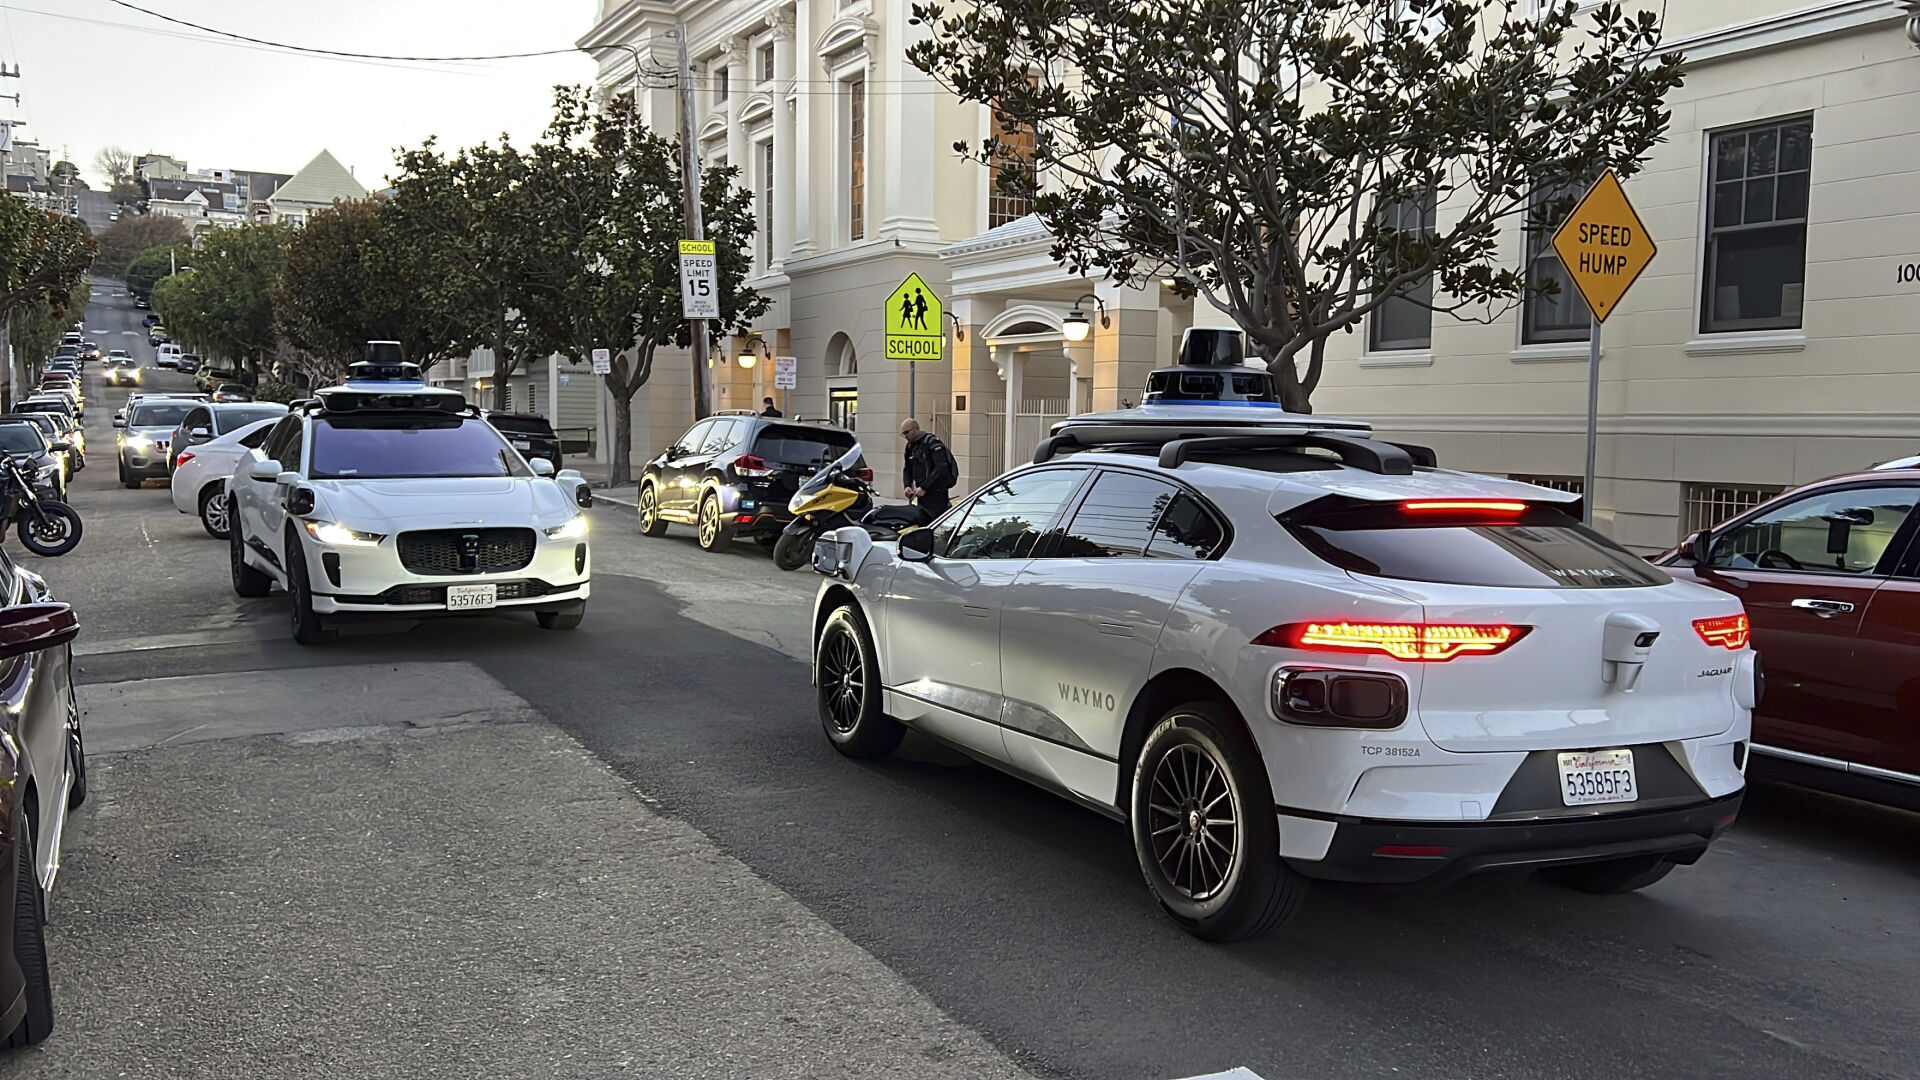 <p>Two Waymo driverless taxis stop and face each other on a street in San Francisco before driving past each other, on Feb. 15, 2023. Cruise, a subsidiary of General Motors, and Waymo, a spinoff from Google, both are on the verge of operating 24-hour services that would transport passengers throughout one of the most densely populated U.S. cities in vehicles that will have no one sitting in the driver’s seat. (AP Photo/Terry Chea)</p>   PHOTO CREDIT: Terry Chea - staff, AP